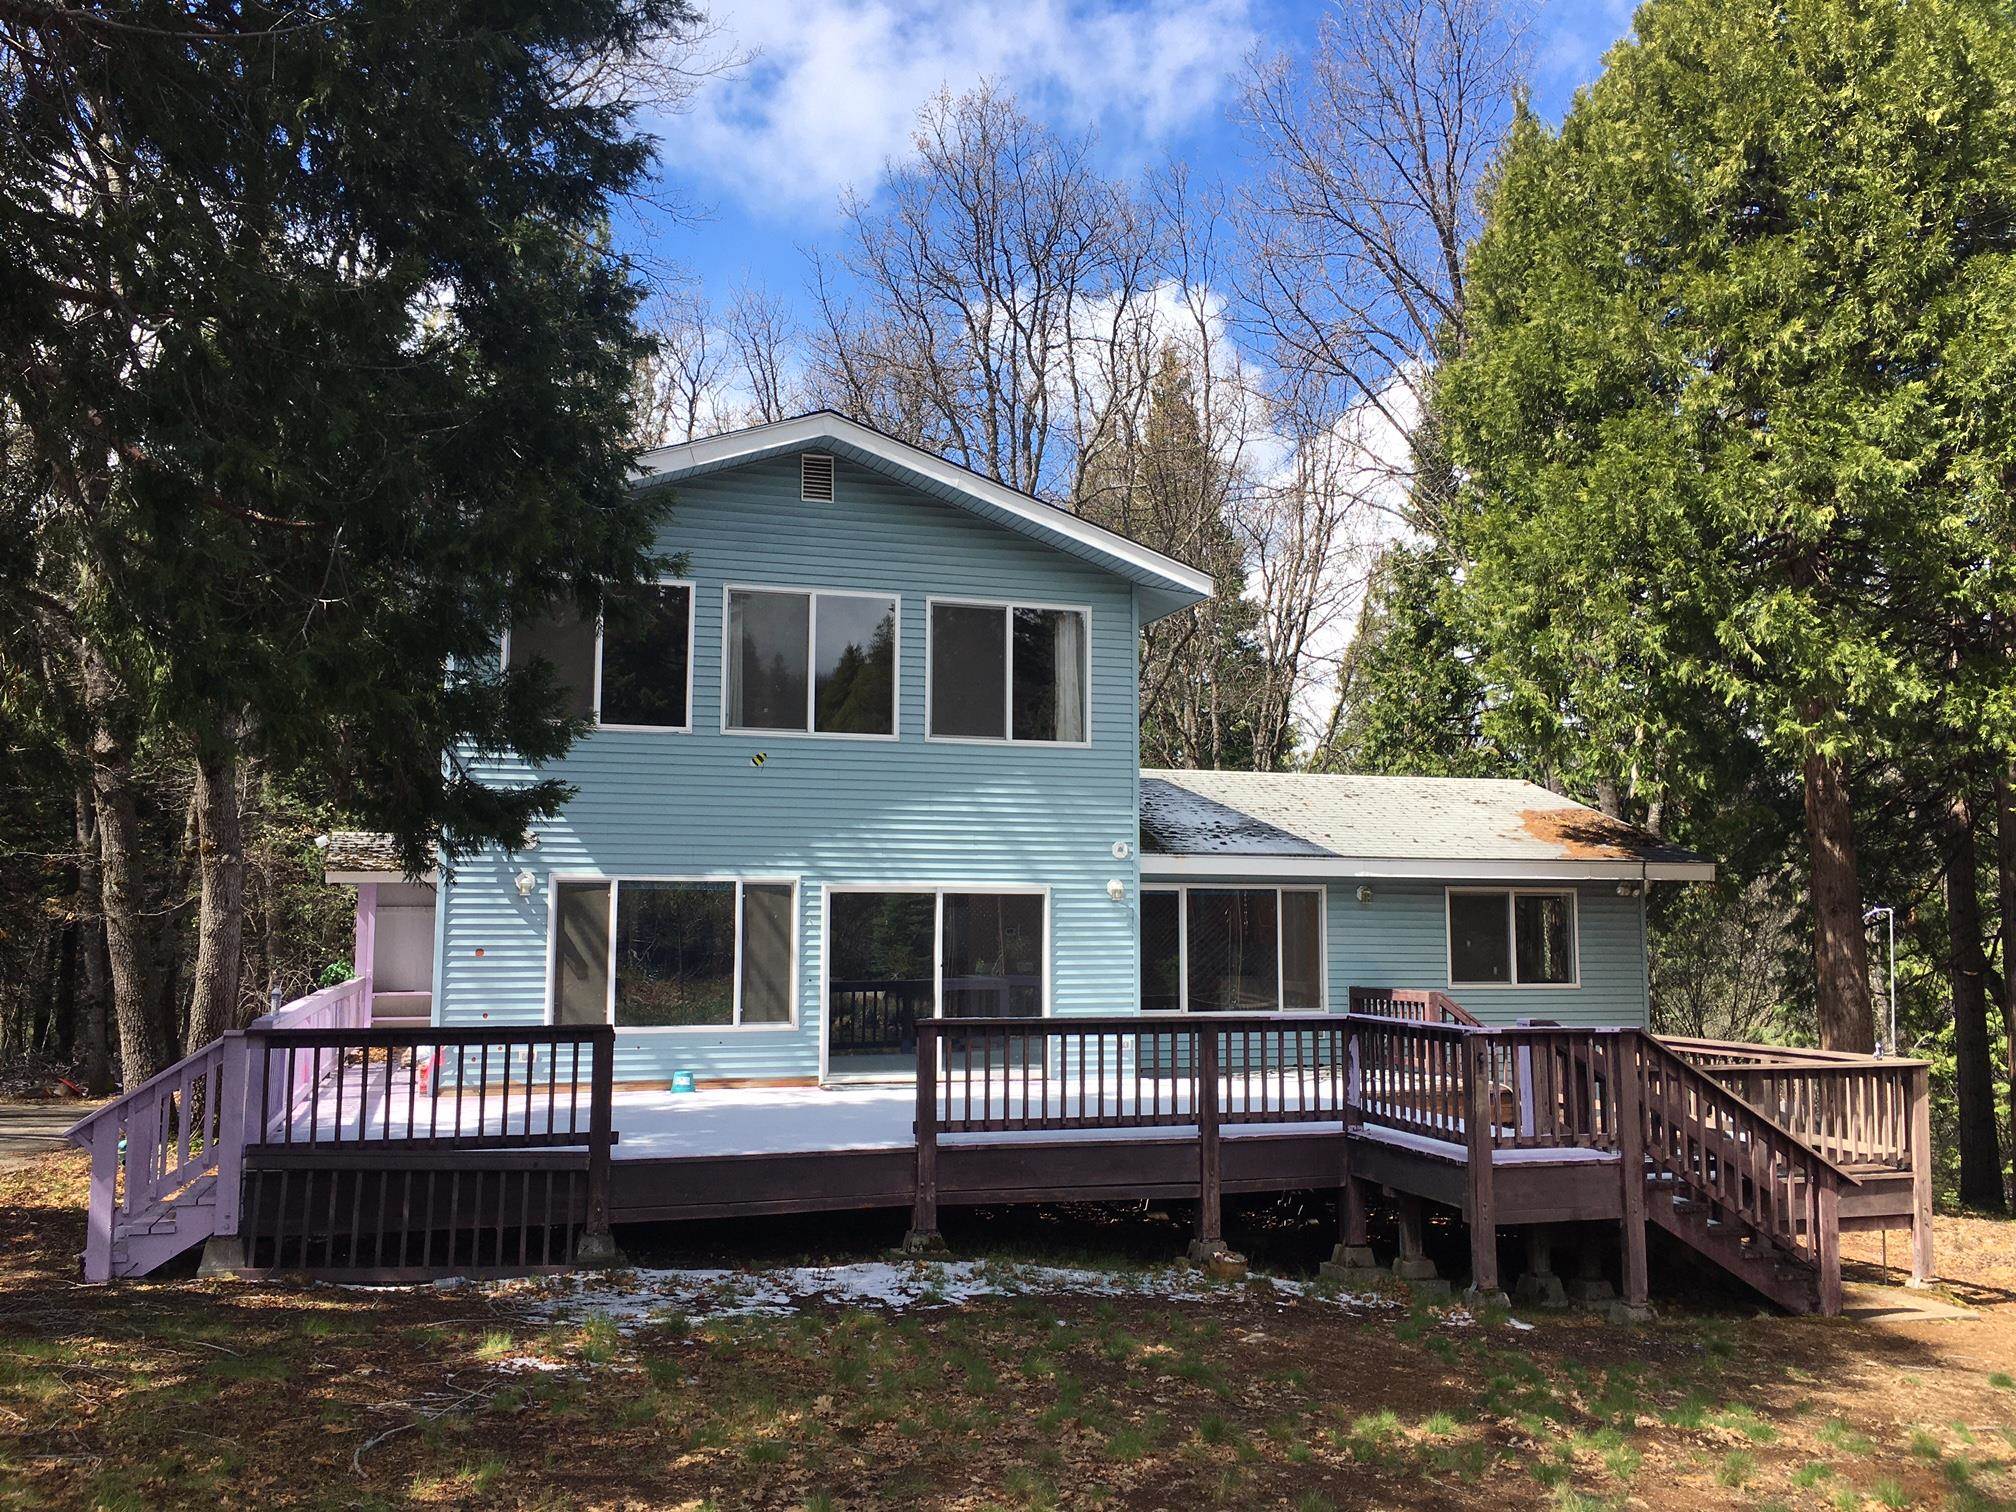 This hard-to-find 5BR/3BA home has a wonderful view of Mt Shasta!  At well over 3000 sq.ft. total living space, and 2.25 acres in one of Mt Shasta's sought-after neighborhoods, you don't need to look any further.  This home is set up with two master bedrooms, one in the lower level and one in the upper level.  Upstairs master features a beautifully remodeled bathroom with a newer vanity, tile floors, and a jetted tub.  Other bathrooms also feature tile floors and newer vanities.  Living room, entry and hallway feature wood flooring.  The roomy kitchen has plenty of room for a large dining table, oak cabinets and a view of the front yard.  Good sized deck lets you enjoy the peaceful setting. Vinyl siding ensures you'll spend your time having fun instead of painting every few years.  Blacktop driveway and parking area provide plenty of room for vehicles to turn around, while still providing room for your RV or a car-port or detached garage.